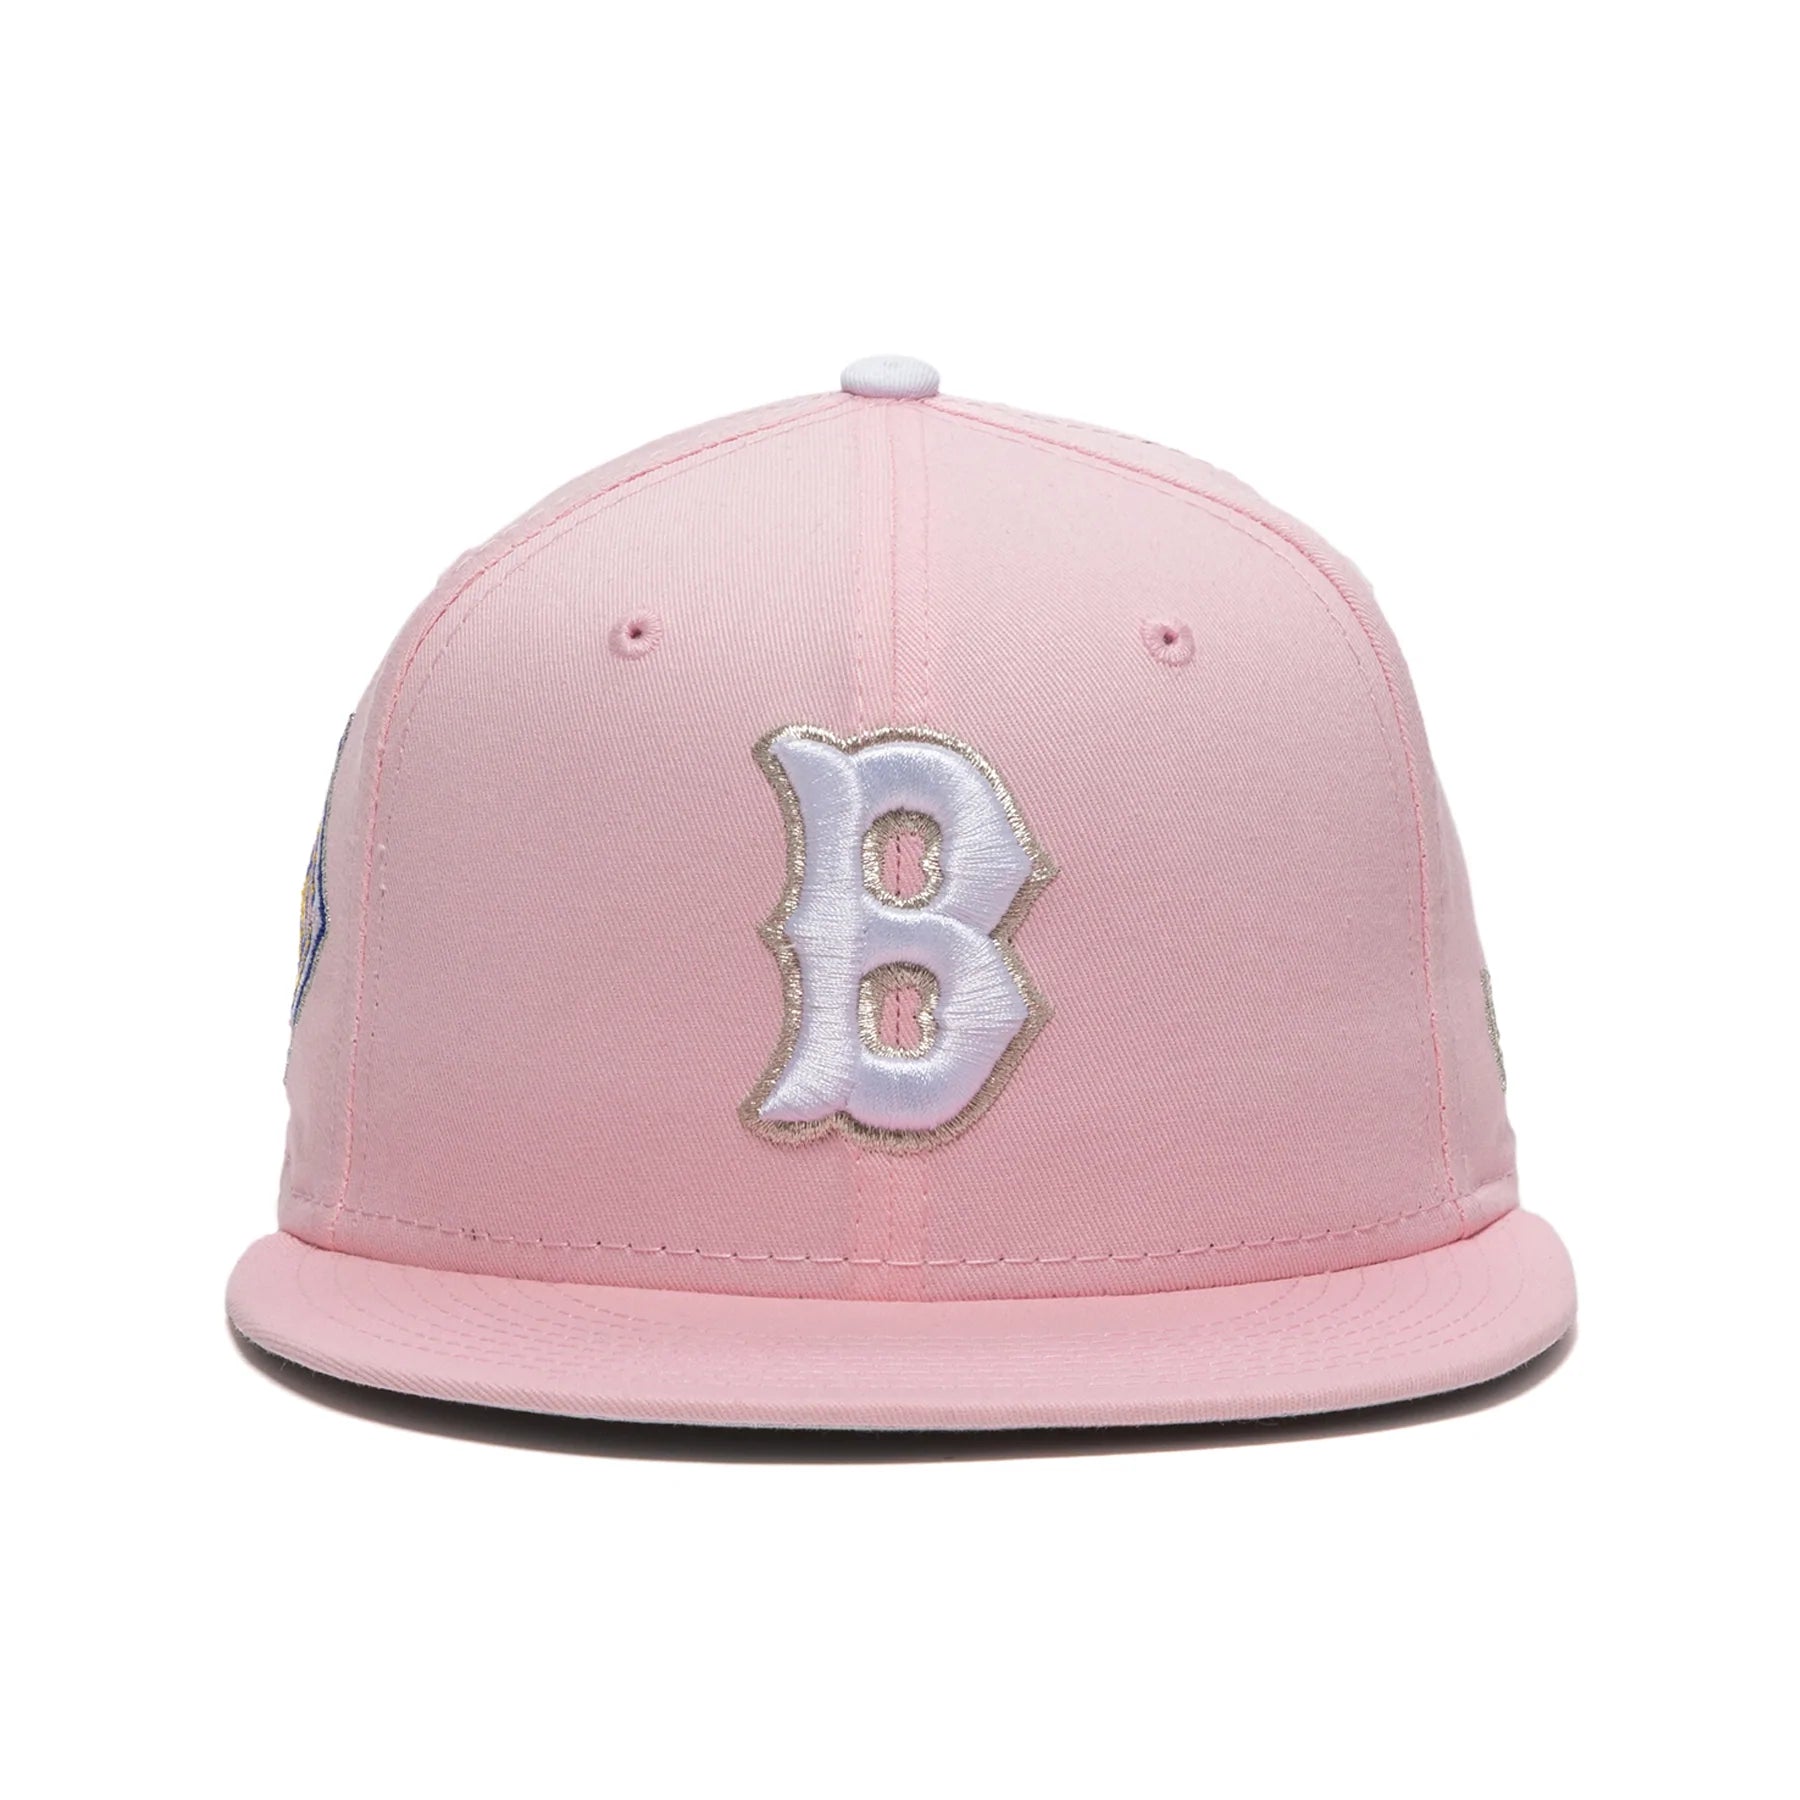 New Era x Concepts 5950 Boston Red Sox Fitted Hat - Cotton Pink - Supra Sneakers